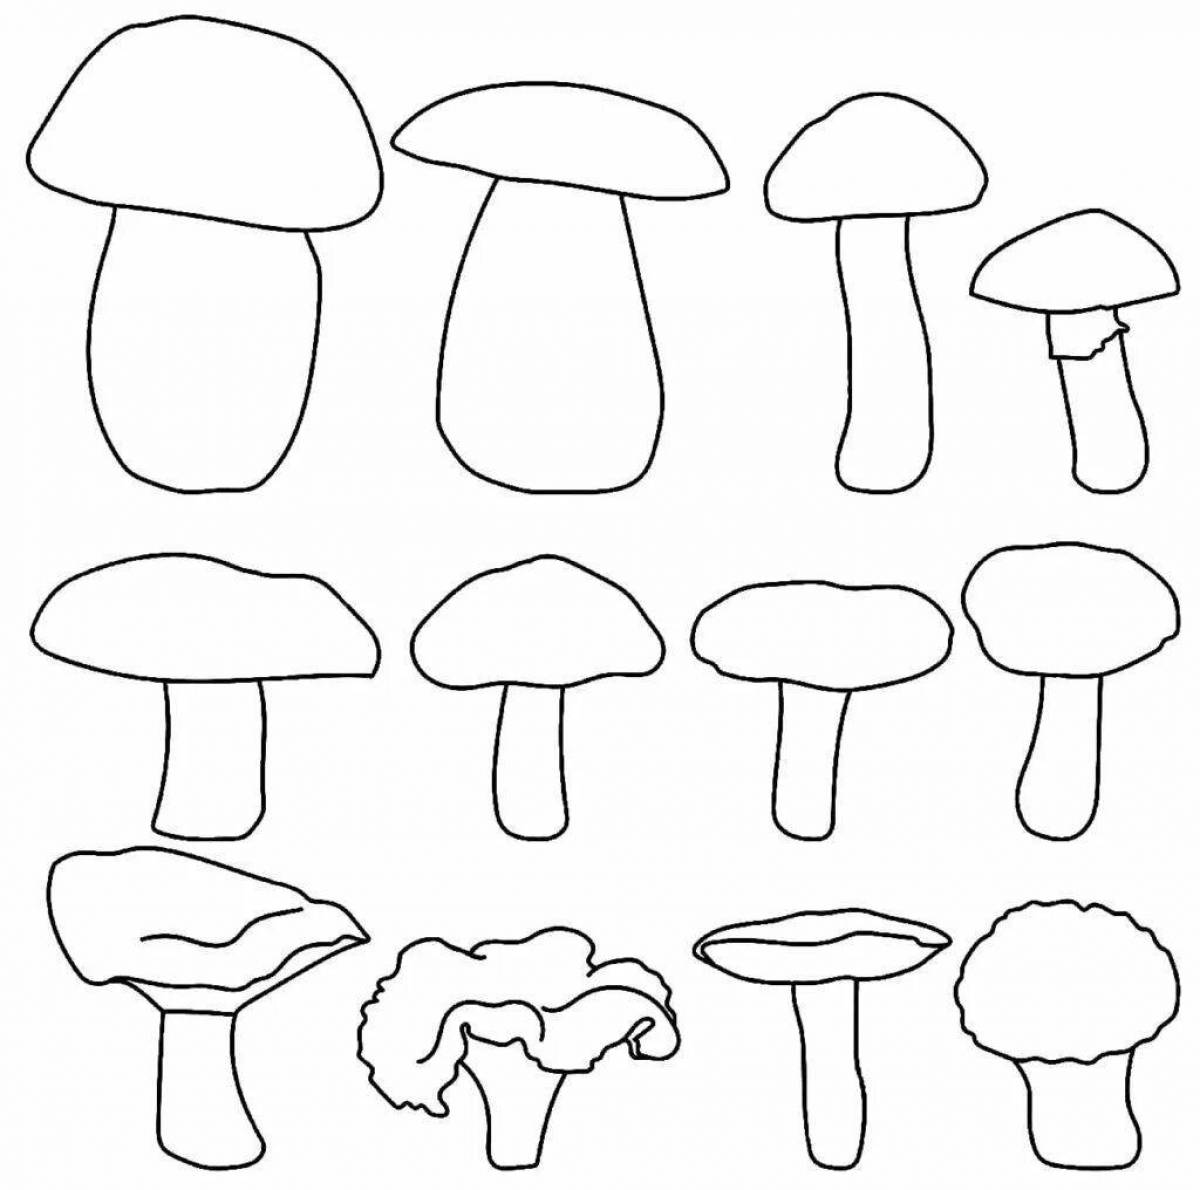 Fun mushroom coloring book for 4-5 year olds